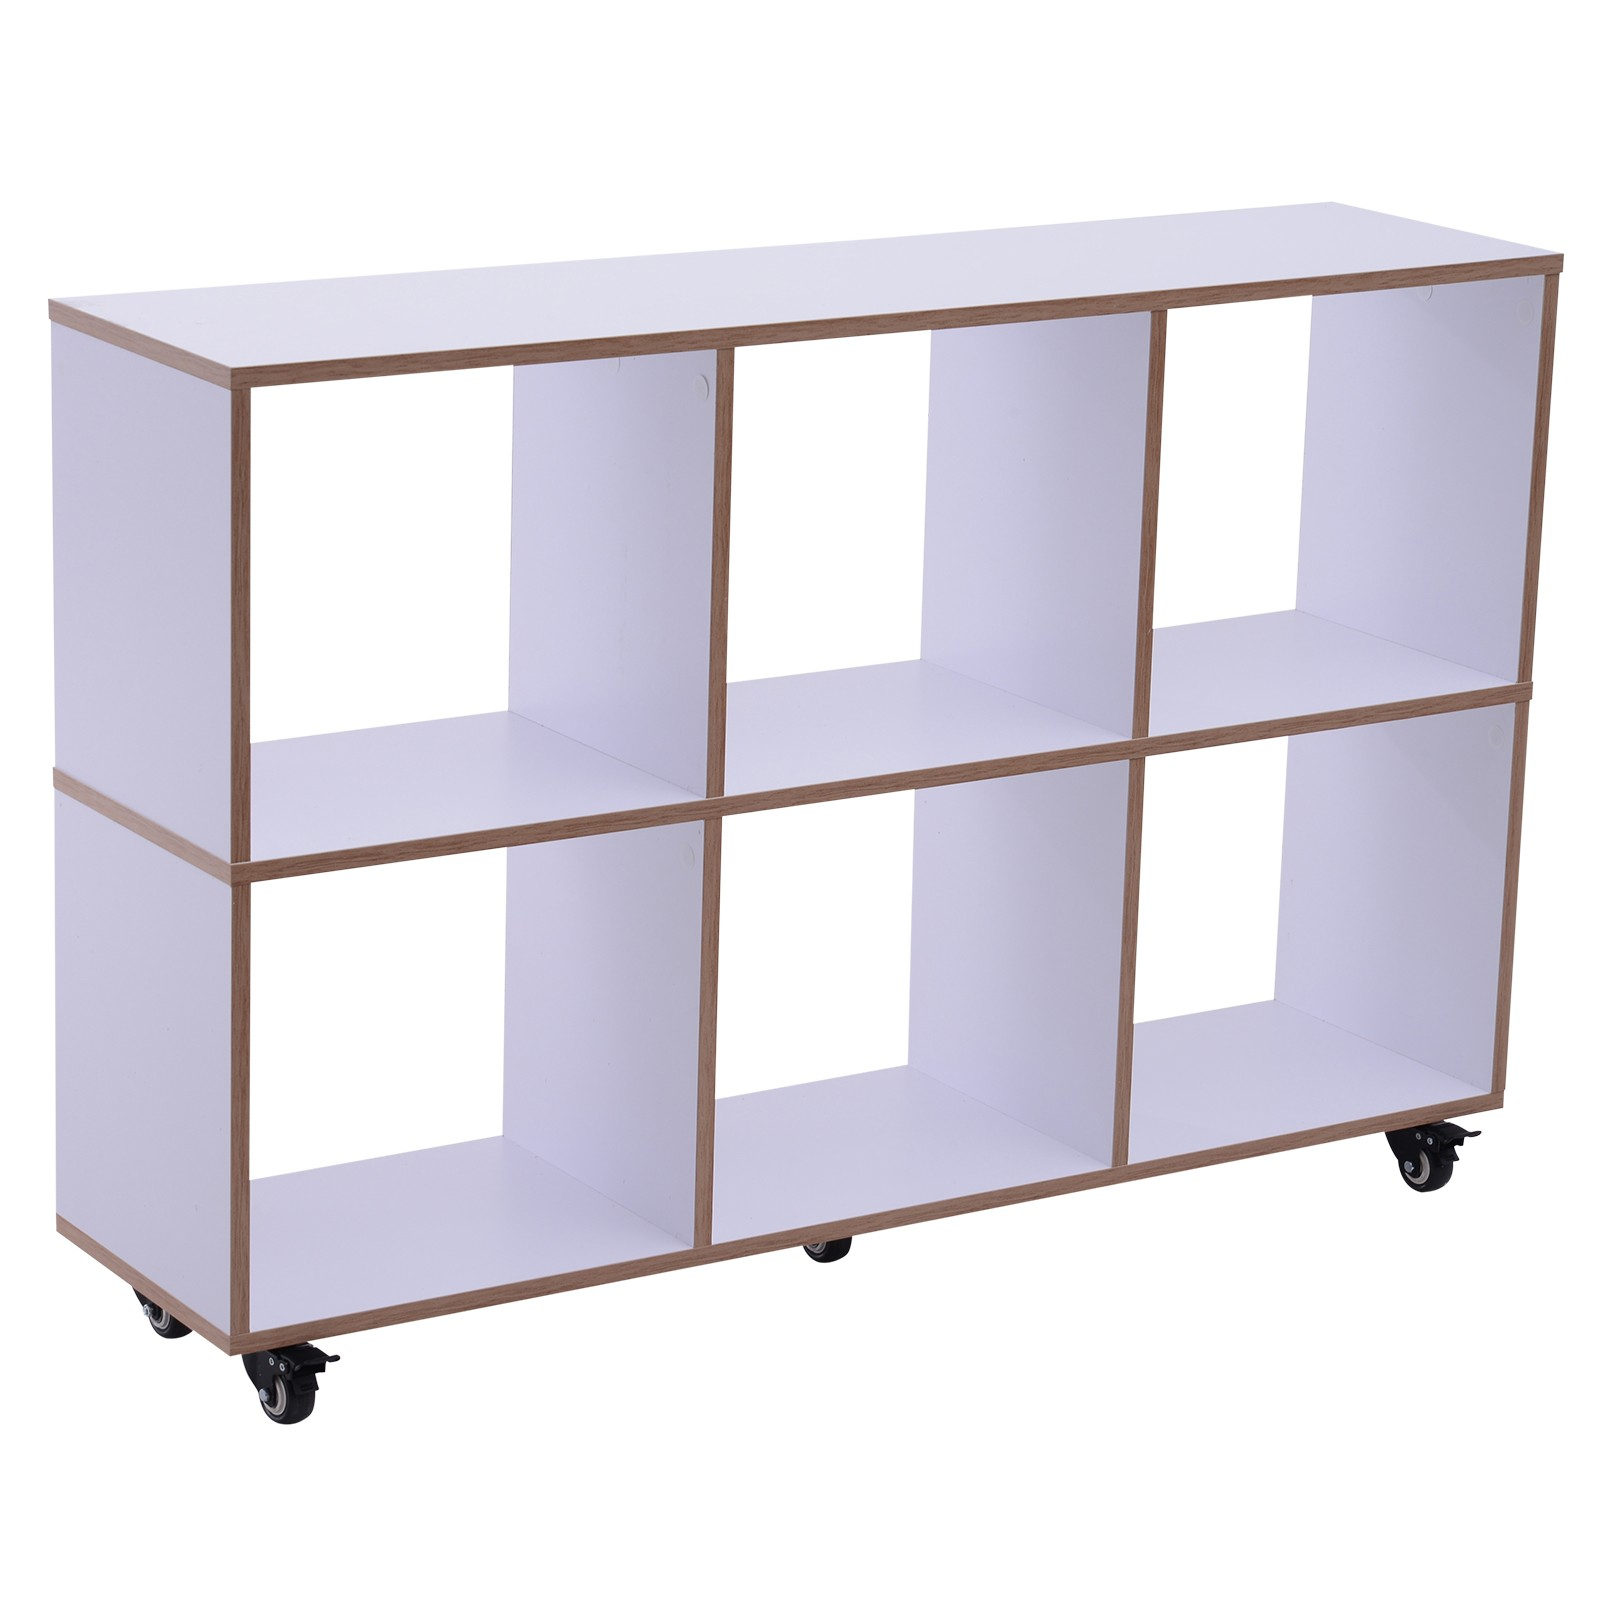 Homcom Wood 6 Cube Mobile File Cabinet Open Storage Shelves 5 Wheels in dimensions 1600 X 1600